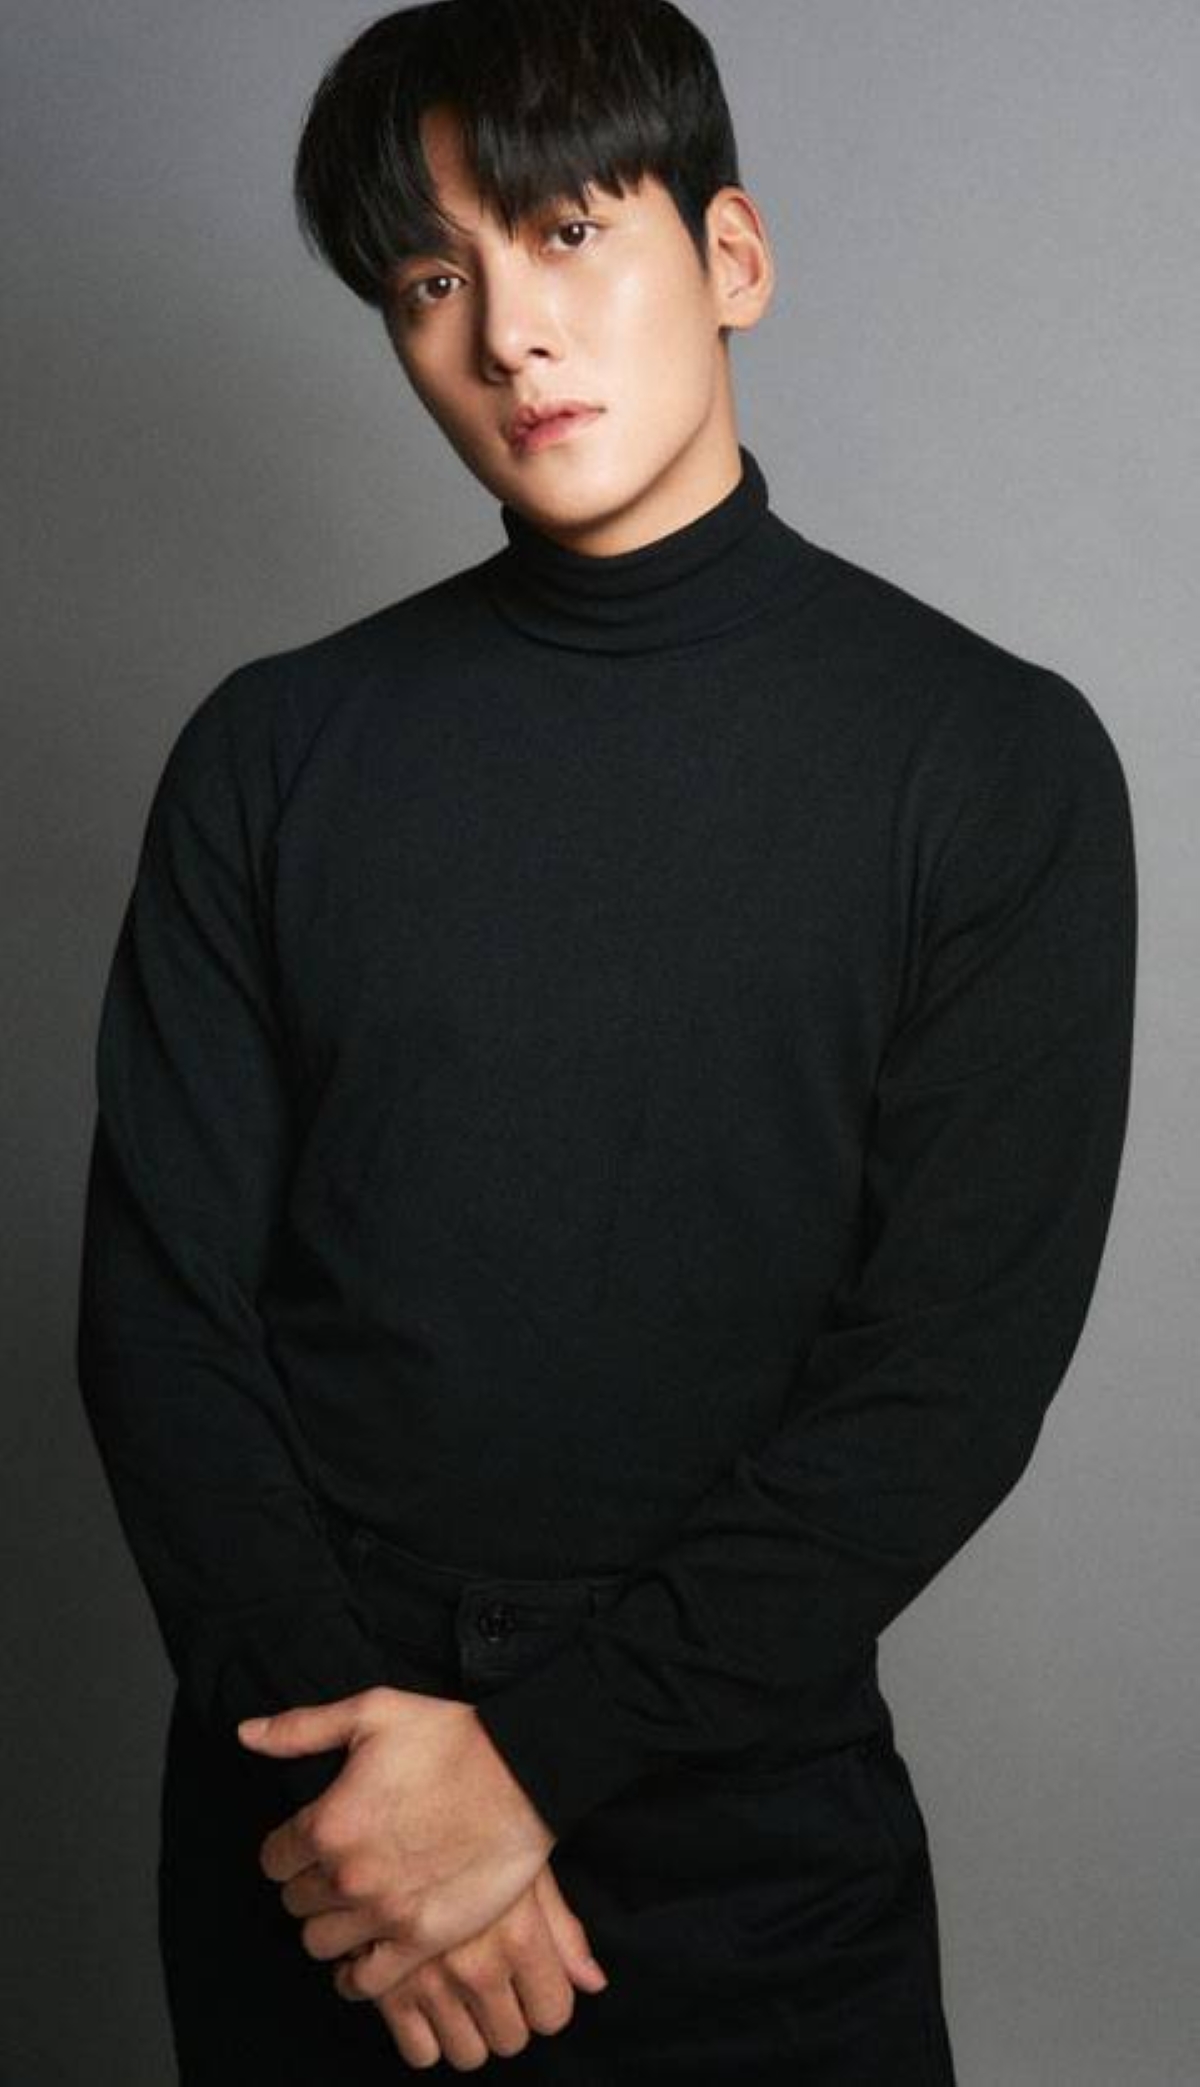 ji changwook returns to disney+ in new action-drama